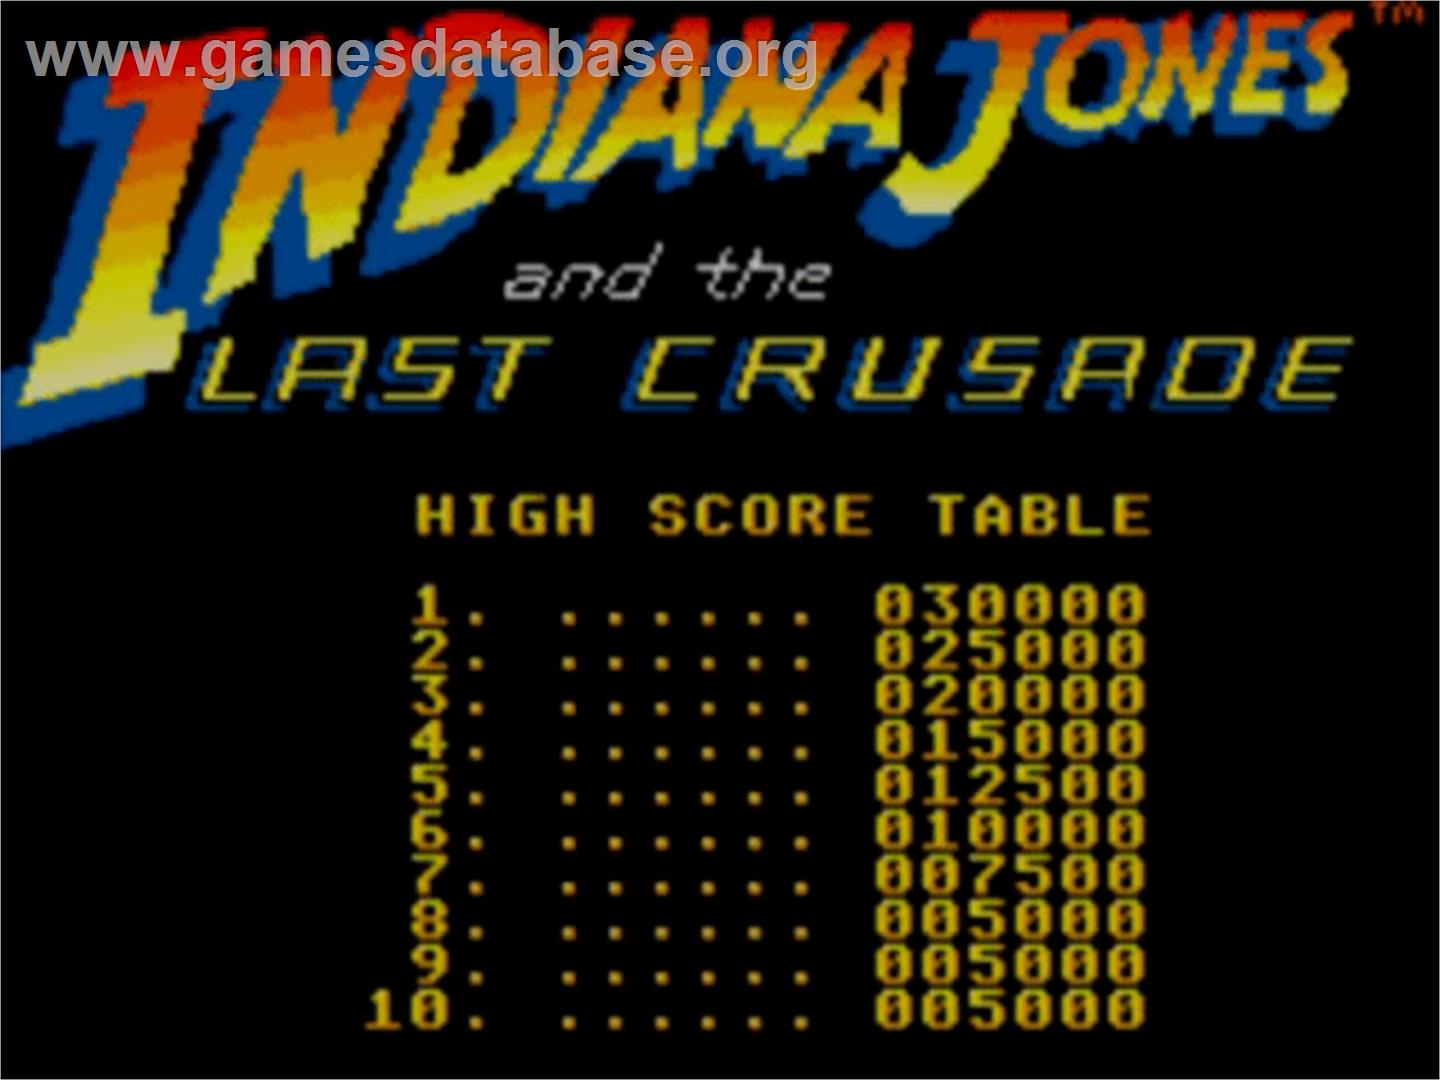 Indiana Jones and the Last Crusade: The Action Game - Sega Master System - Artwork - Title Screen